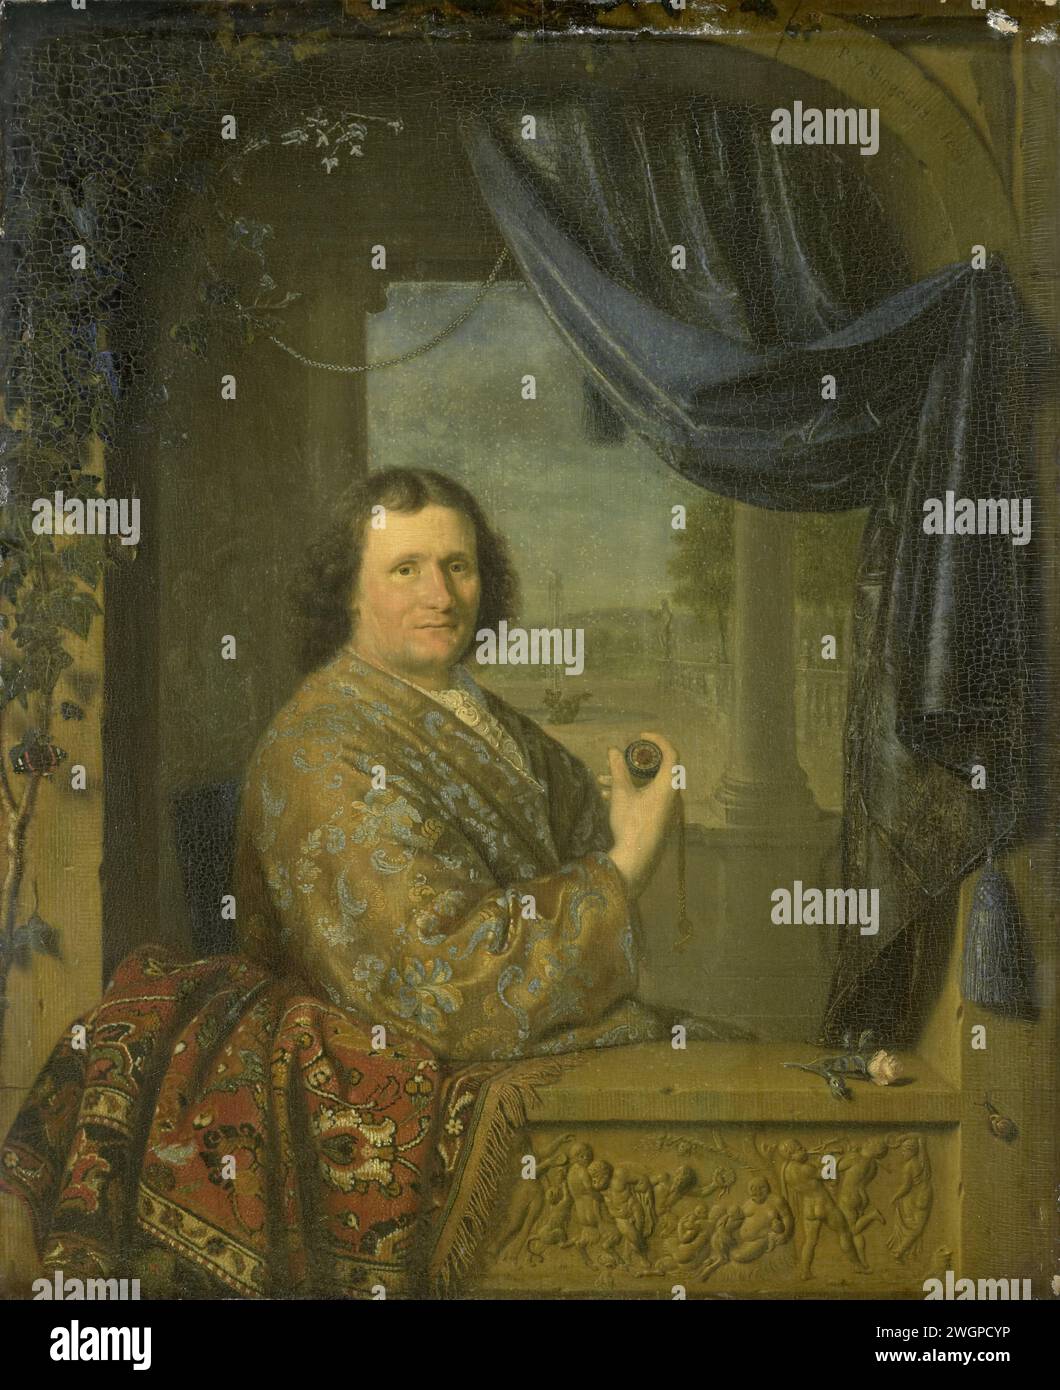 Portrait of a man with a watch, Pieter Cornelisz. Van Slingelandt, 1688 painting Portrait of a man with a watch in his hand, sitting in a stone window. Under the windowsill a relief with a bacchanal. On the windowsill on the left a Persian dress, on the right a rose. In the background through a colonnade a face on a garden with fountain.  panel. oil paint (paint)  anonymous historical person portrayed. watch. human figure at (open) window, seen from outside Stock Photo